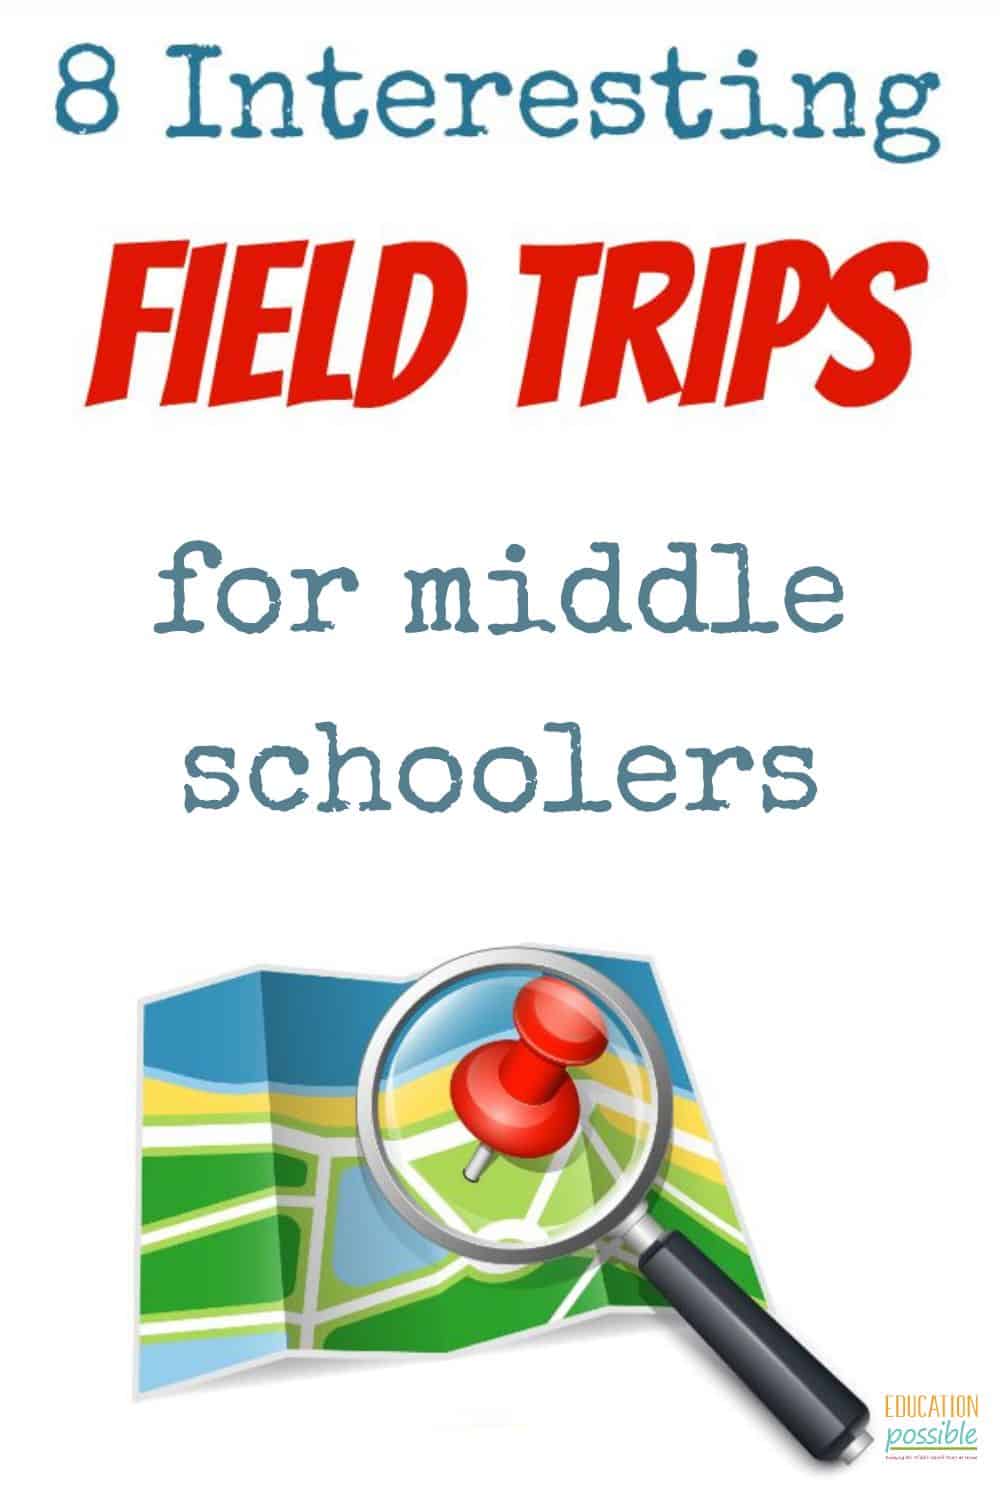 8 Interesting Field Trips for Middle Schoolers